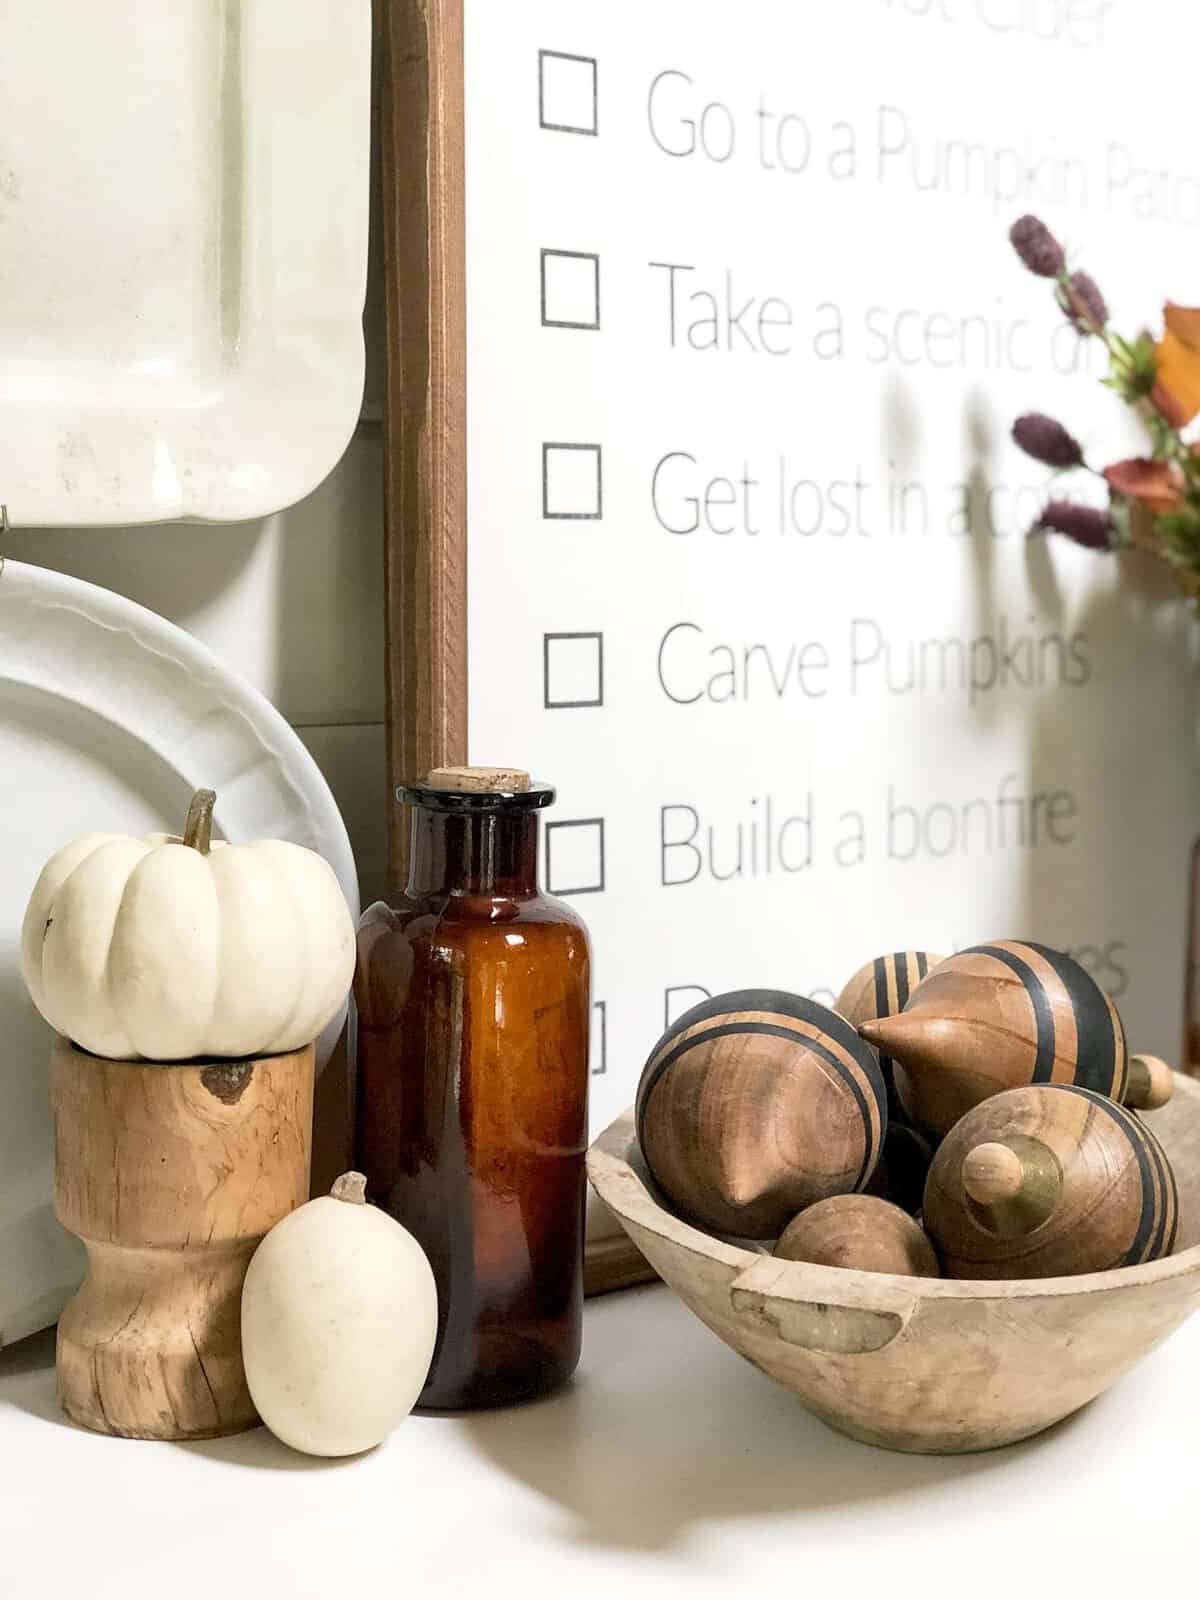 Fall decor ideas using wood accents.